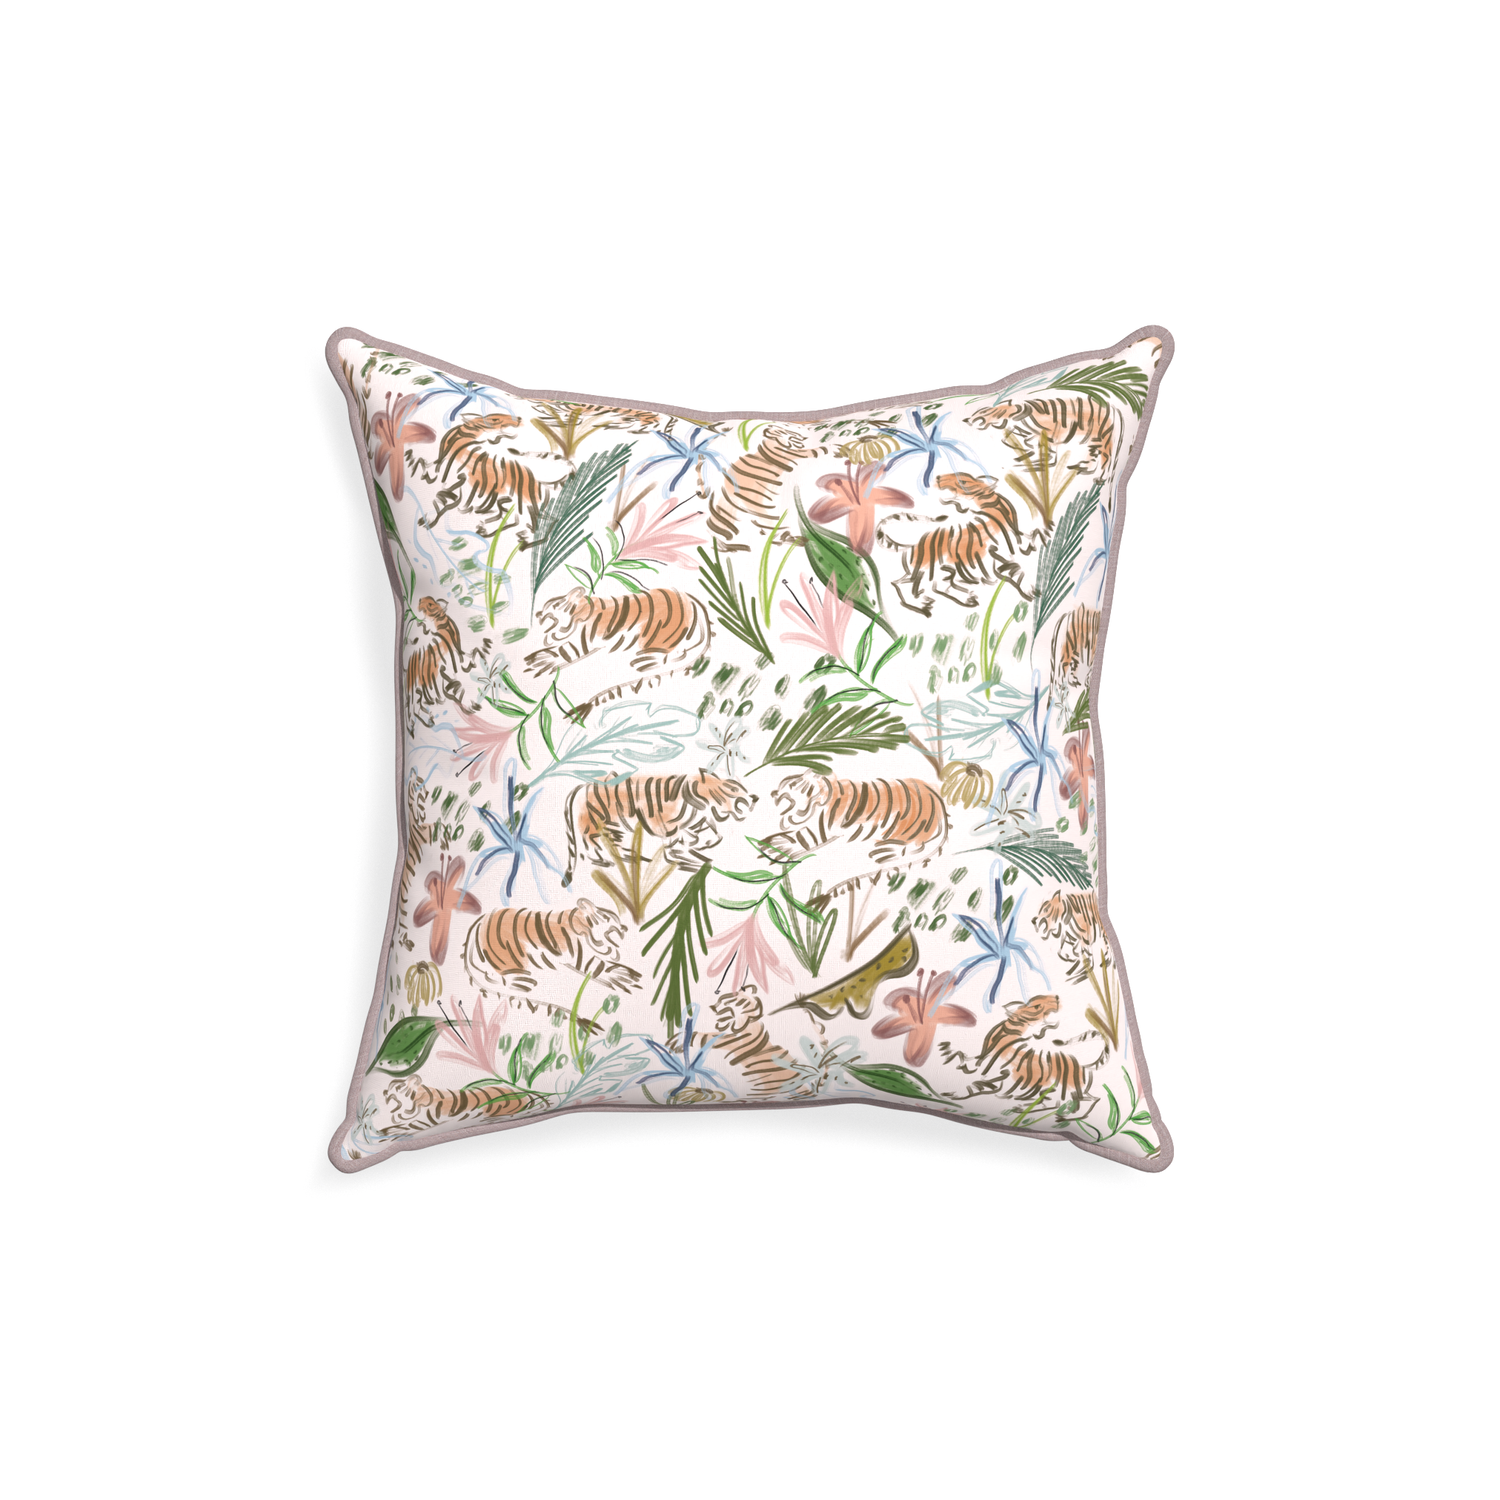 18-square frida pink custom pink chinoiserie tigerpillow with orchid piping on white background